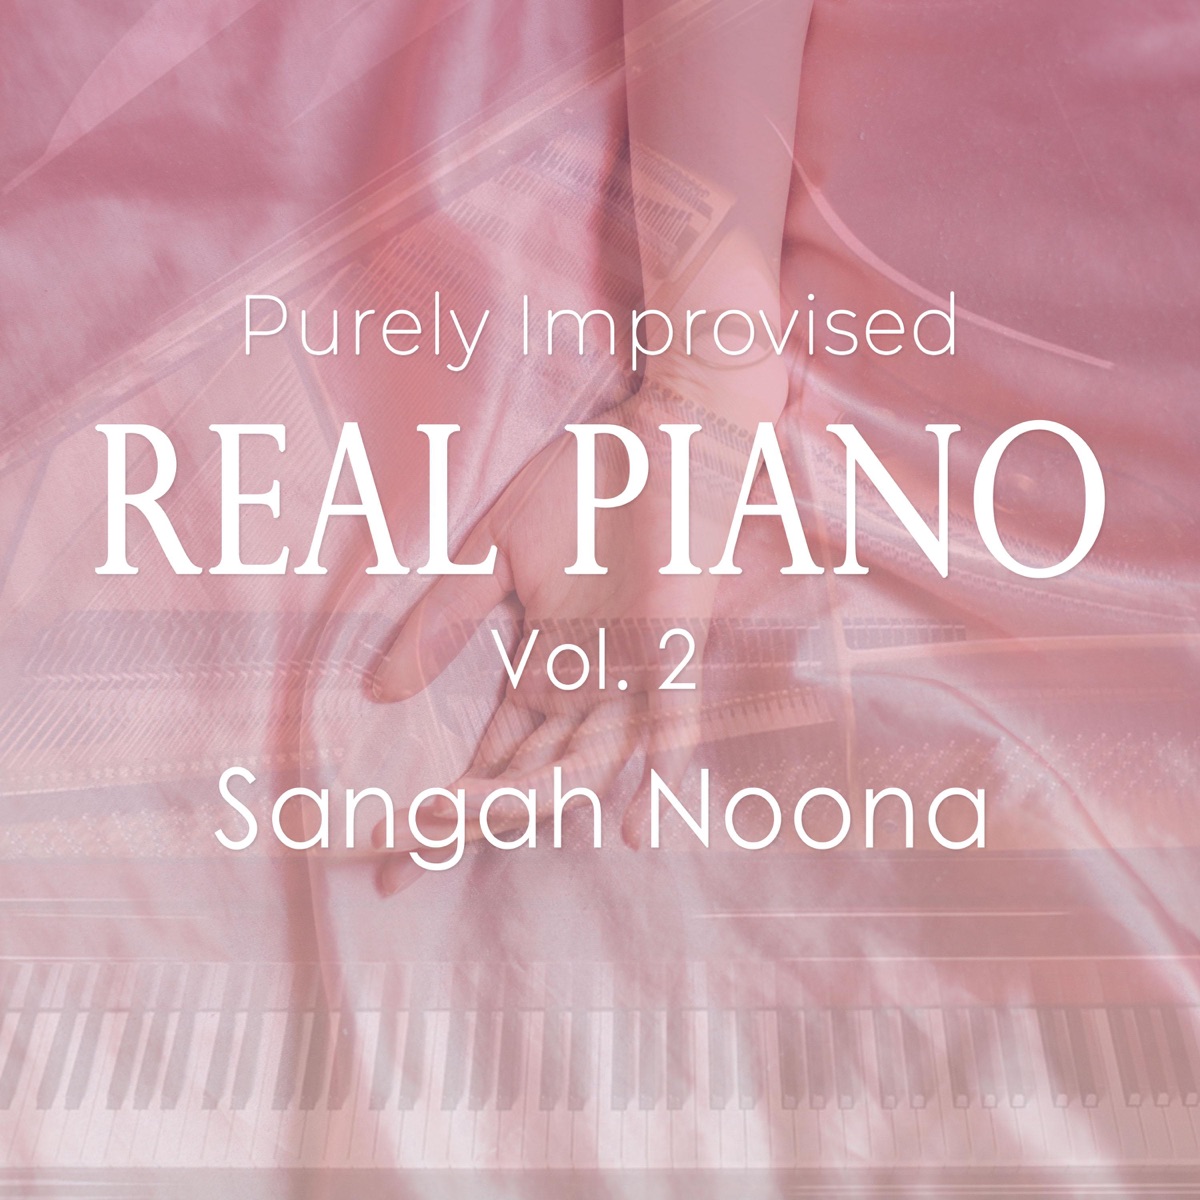 Real Piano, Vol. 1 by Sangah Noona on Apple Music